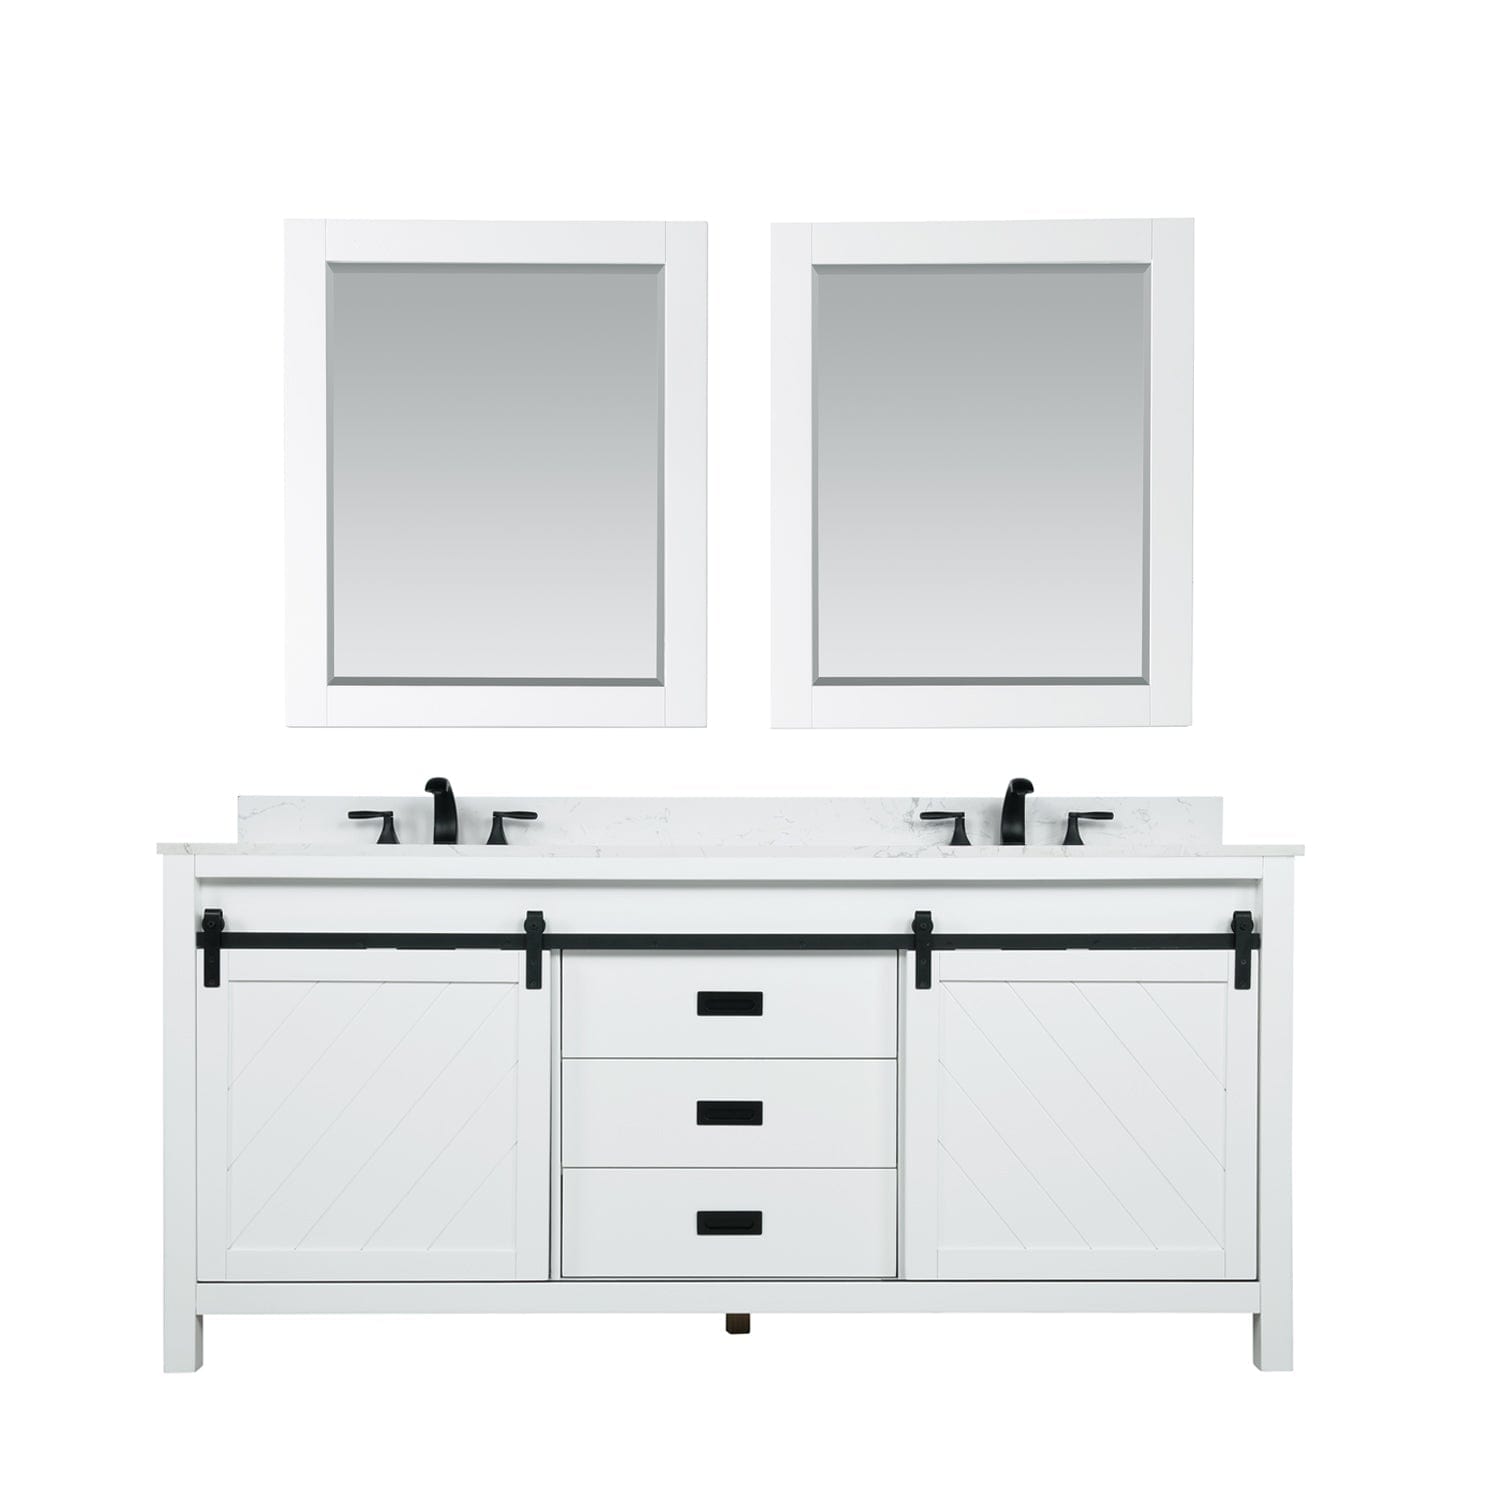 Altair Kinsley 72" Double Bathroom Vanity Set in White and Carrara White Marble Countertop with Mirror 536072-WH-AW - Molaix696952511291Vanity536072-WH-AW